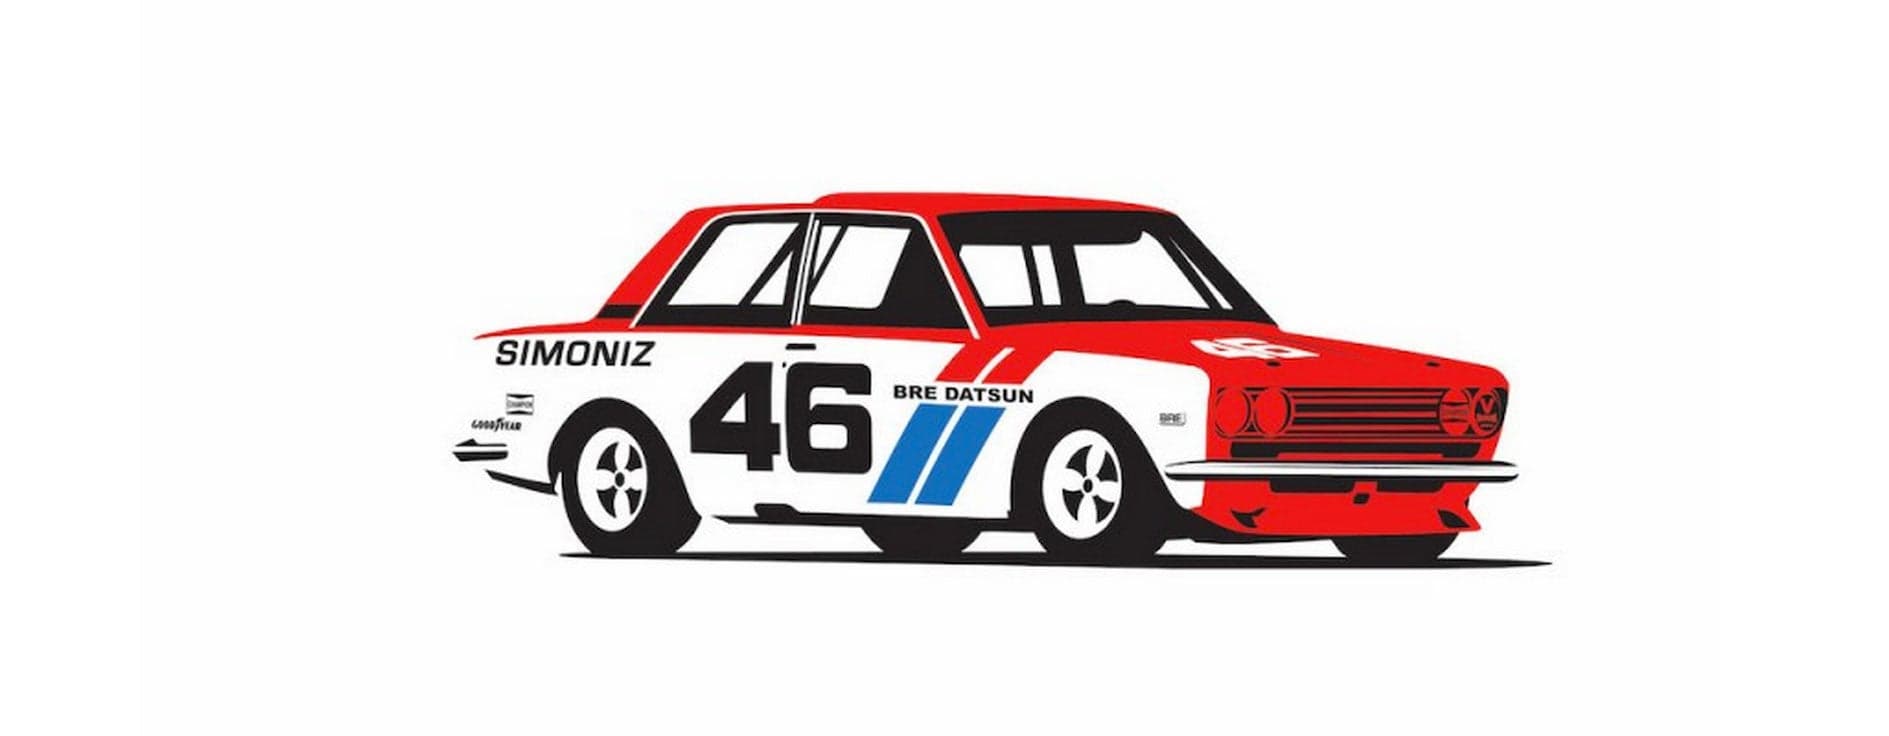 This Excellent Datsun 510 BRE Print is Only $25